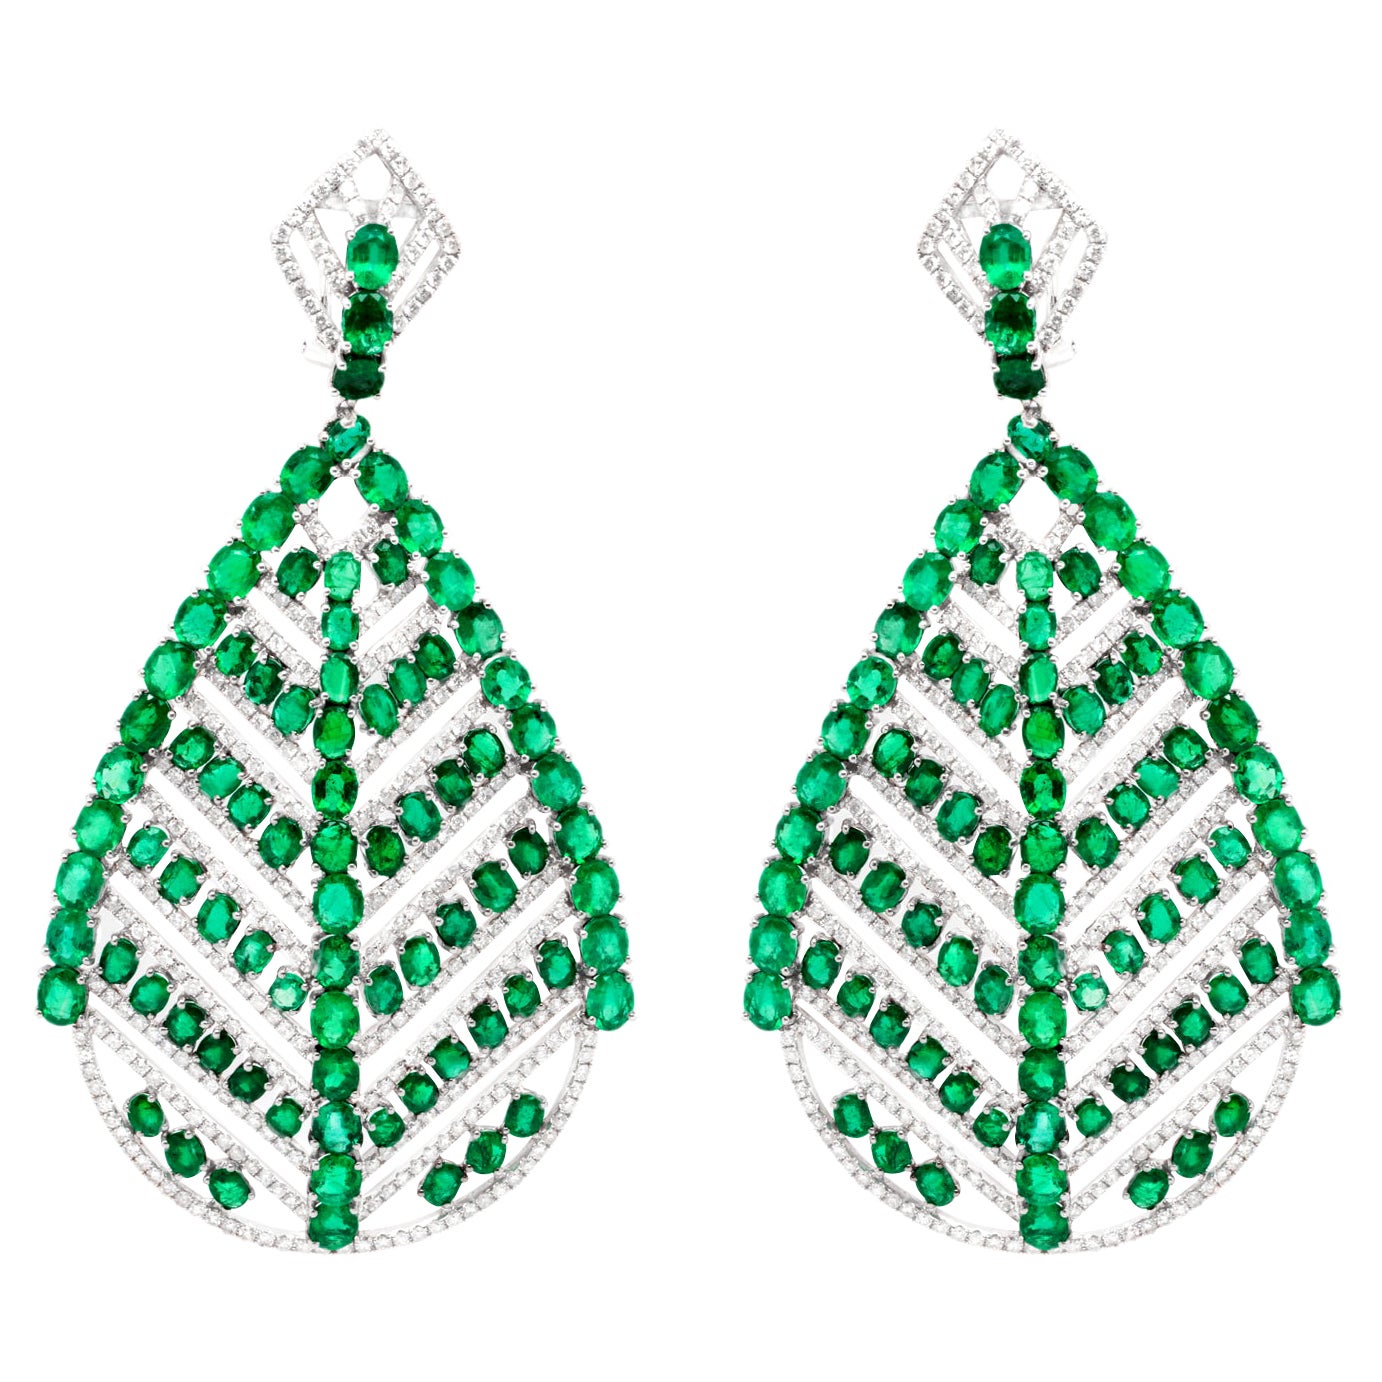 Emerald and Diamond Earrings 66 Carats Total 18K Gold